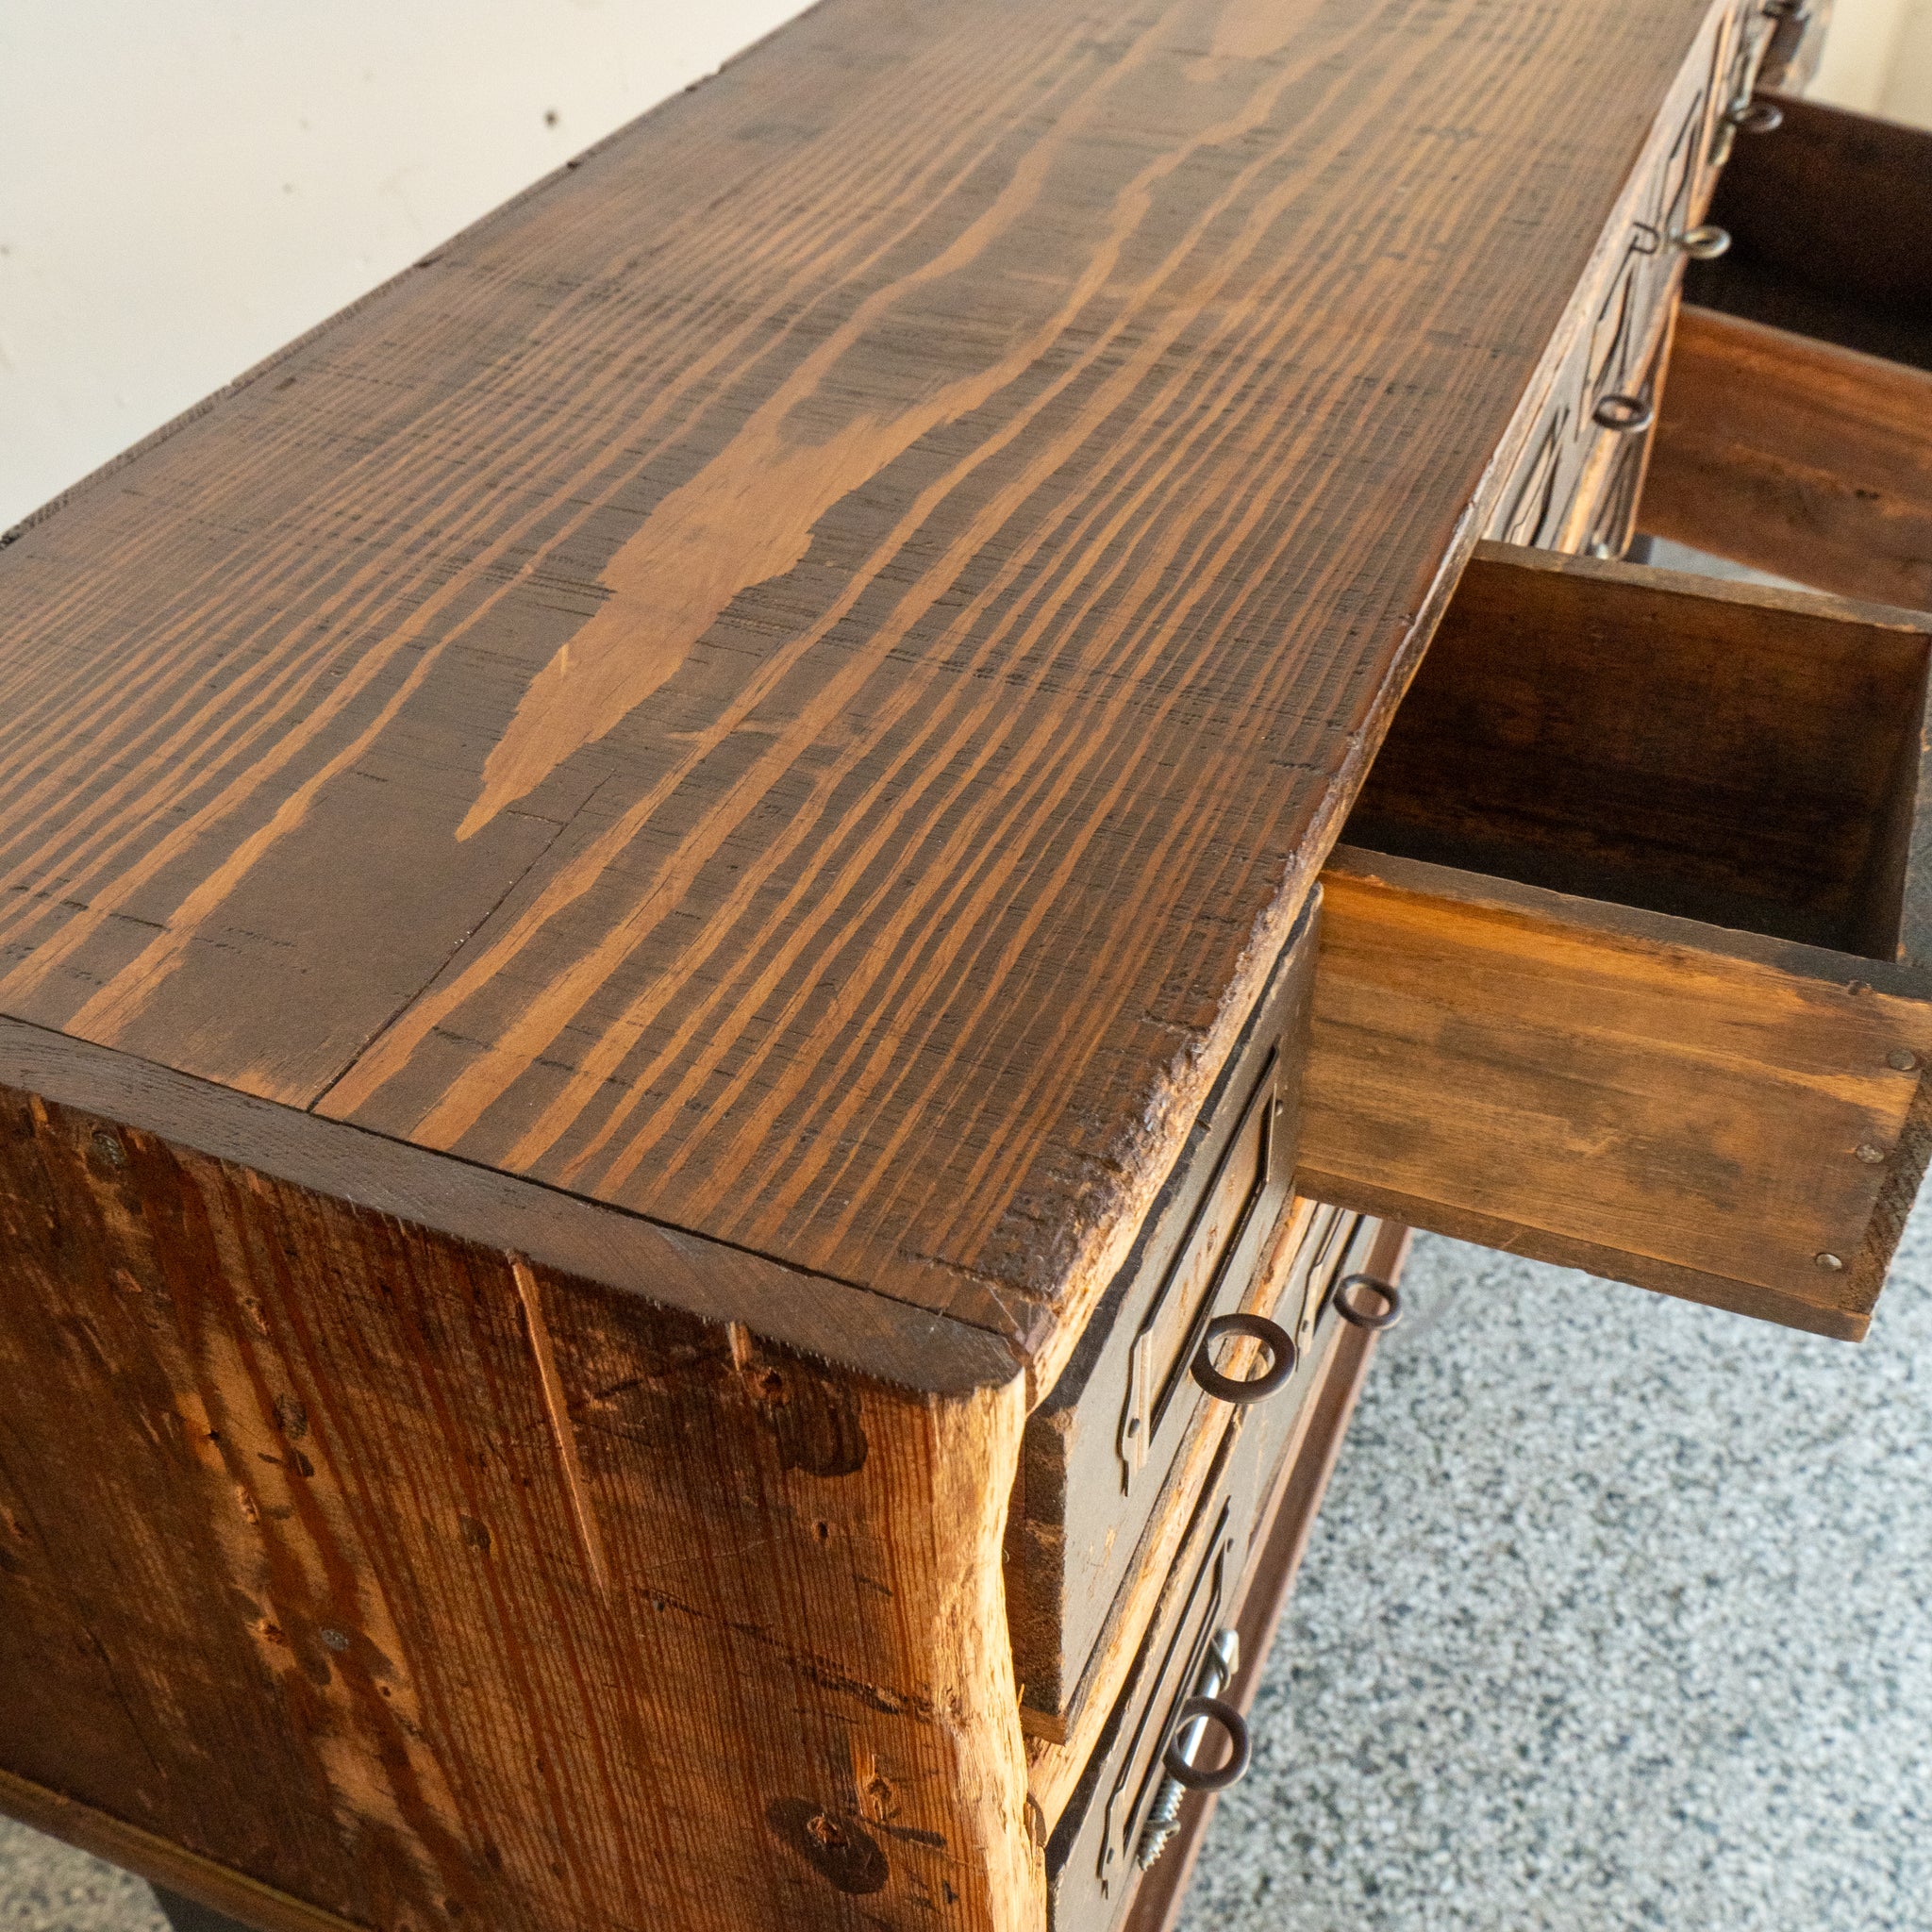 Detroit hardware co entry table top and detail view reclaimed wood